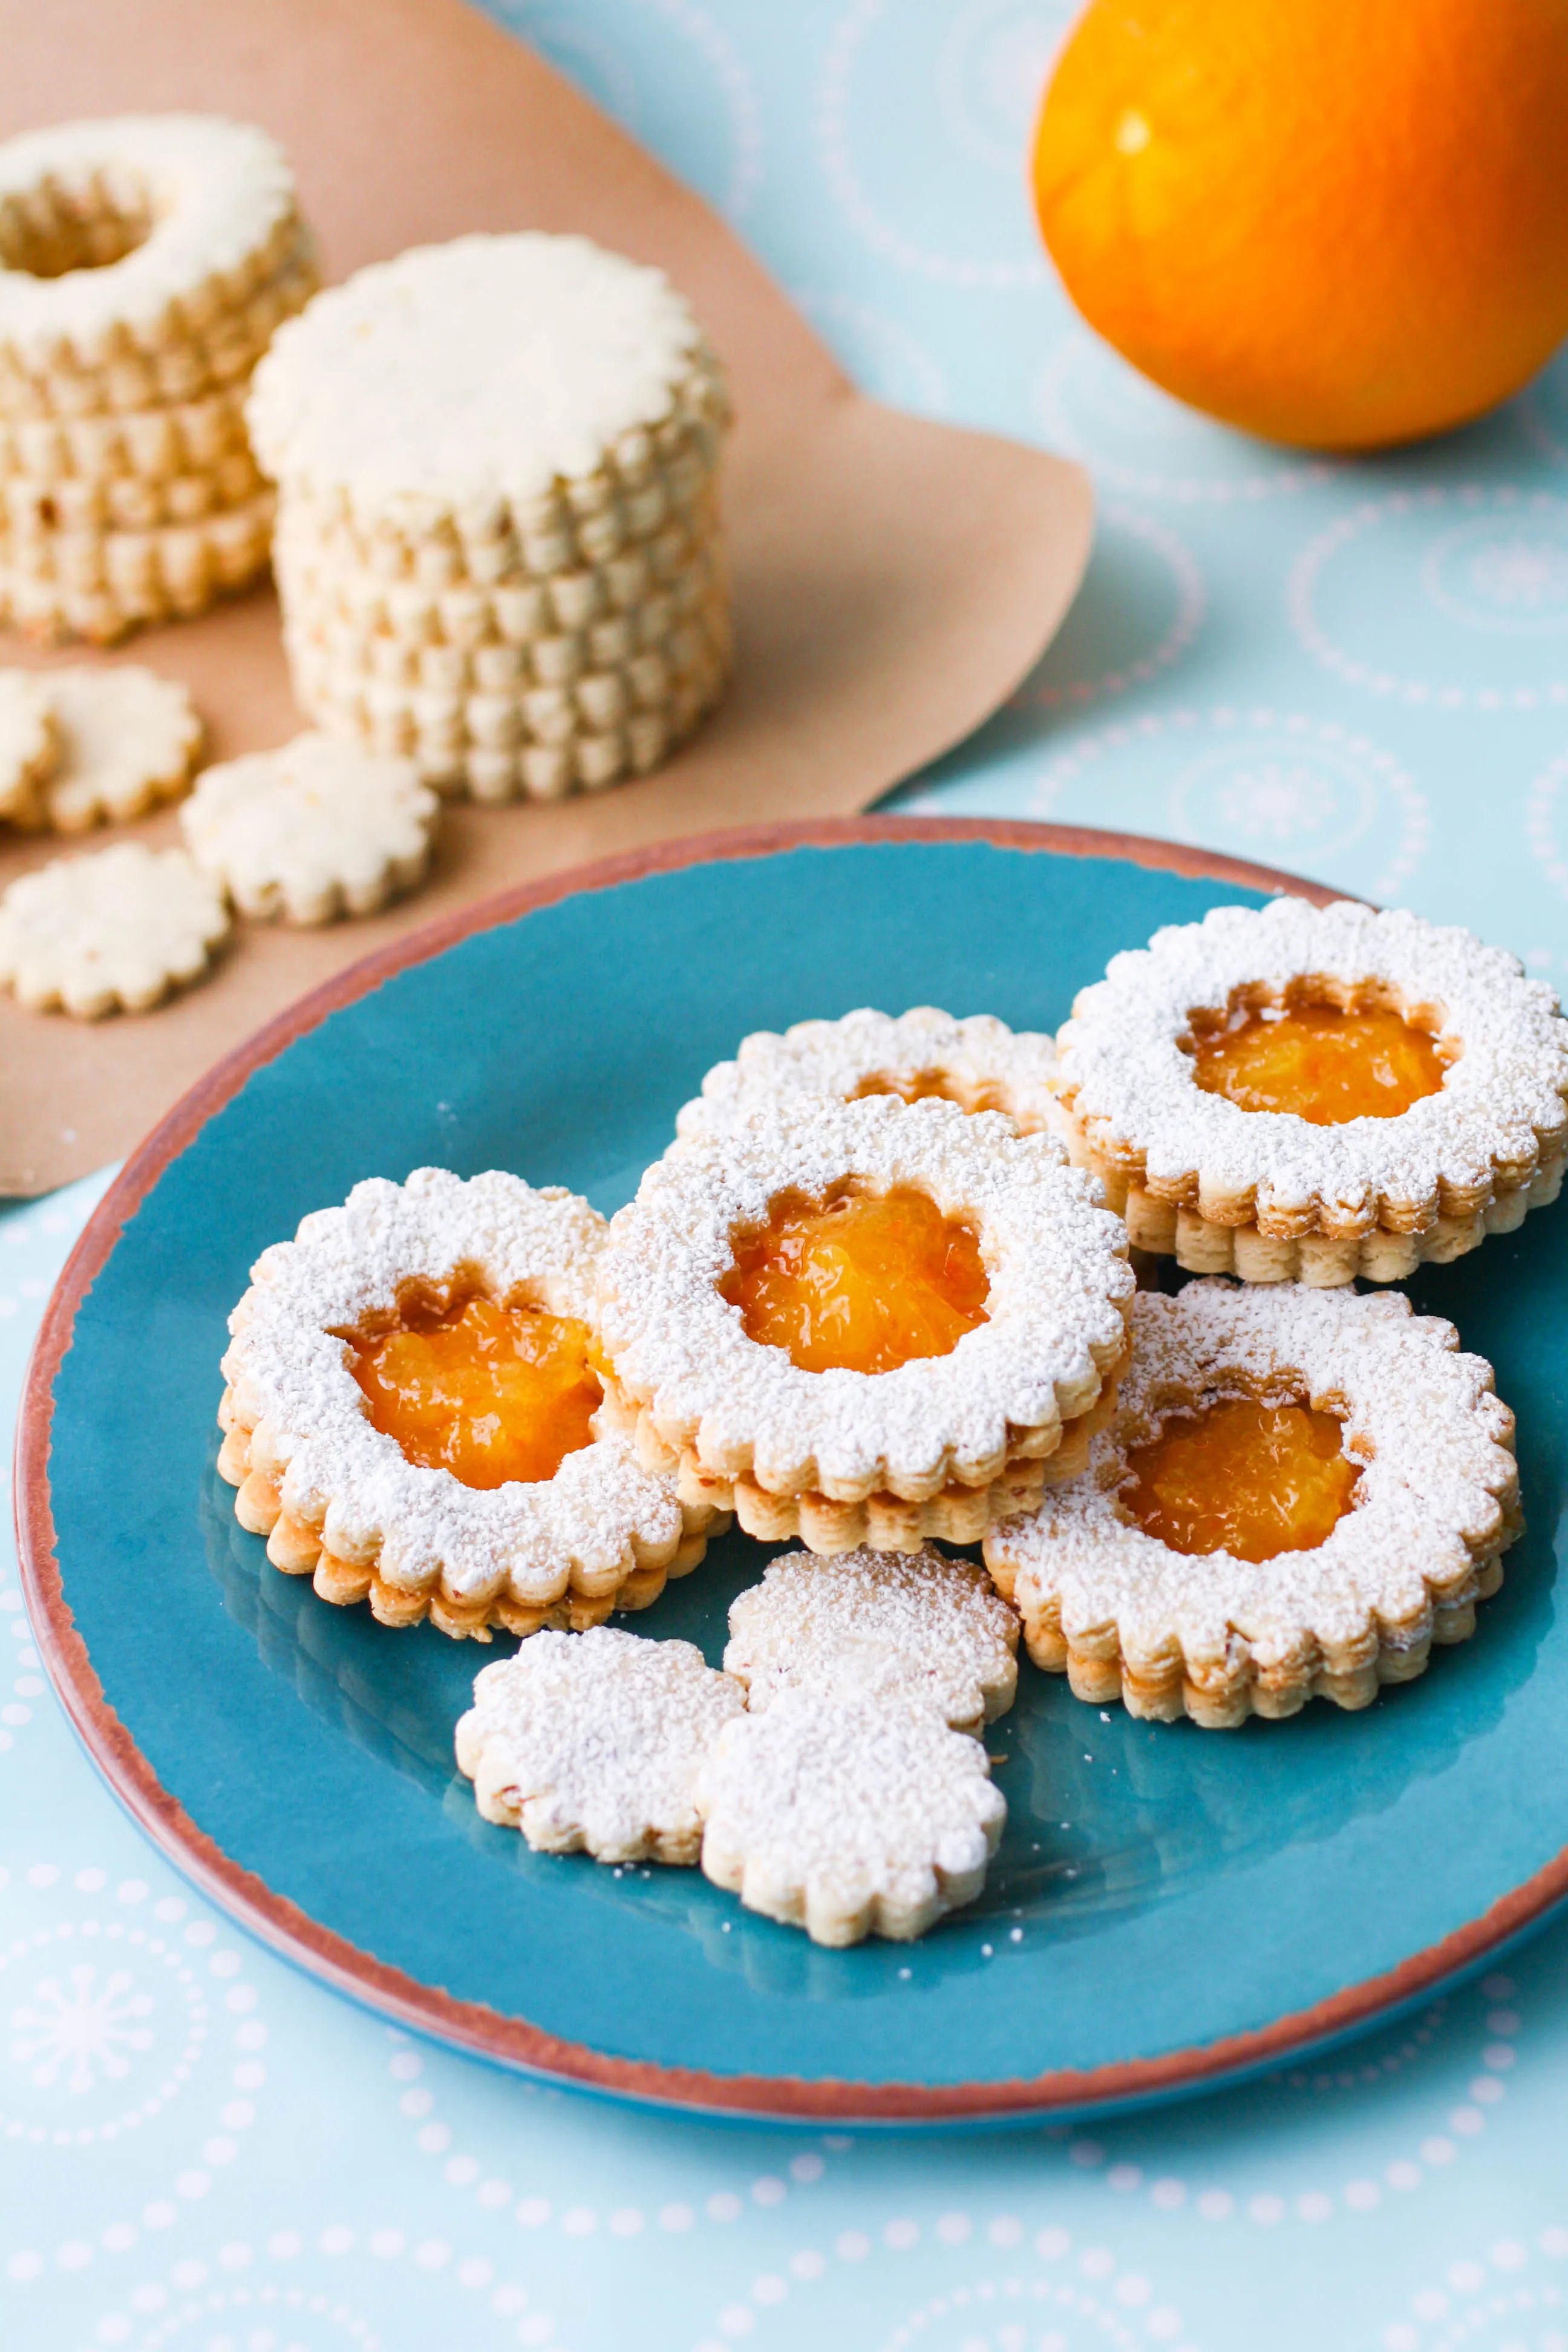 Linzer Cookies with Homemade Marmalade are beautiful for the holiday season. These Linzer Cookies make a great gift, too!